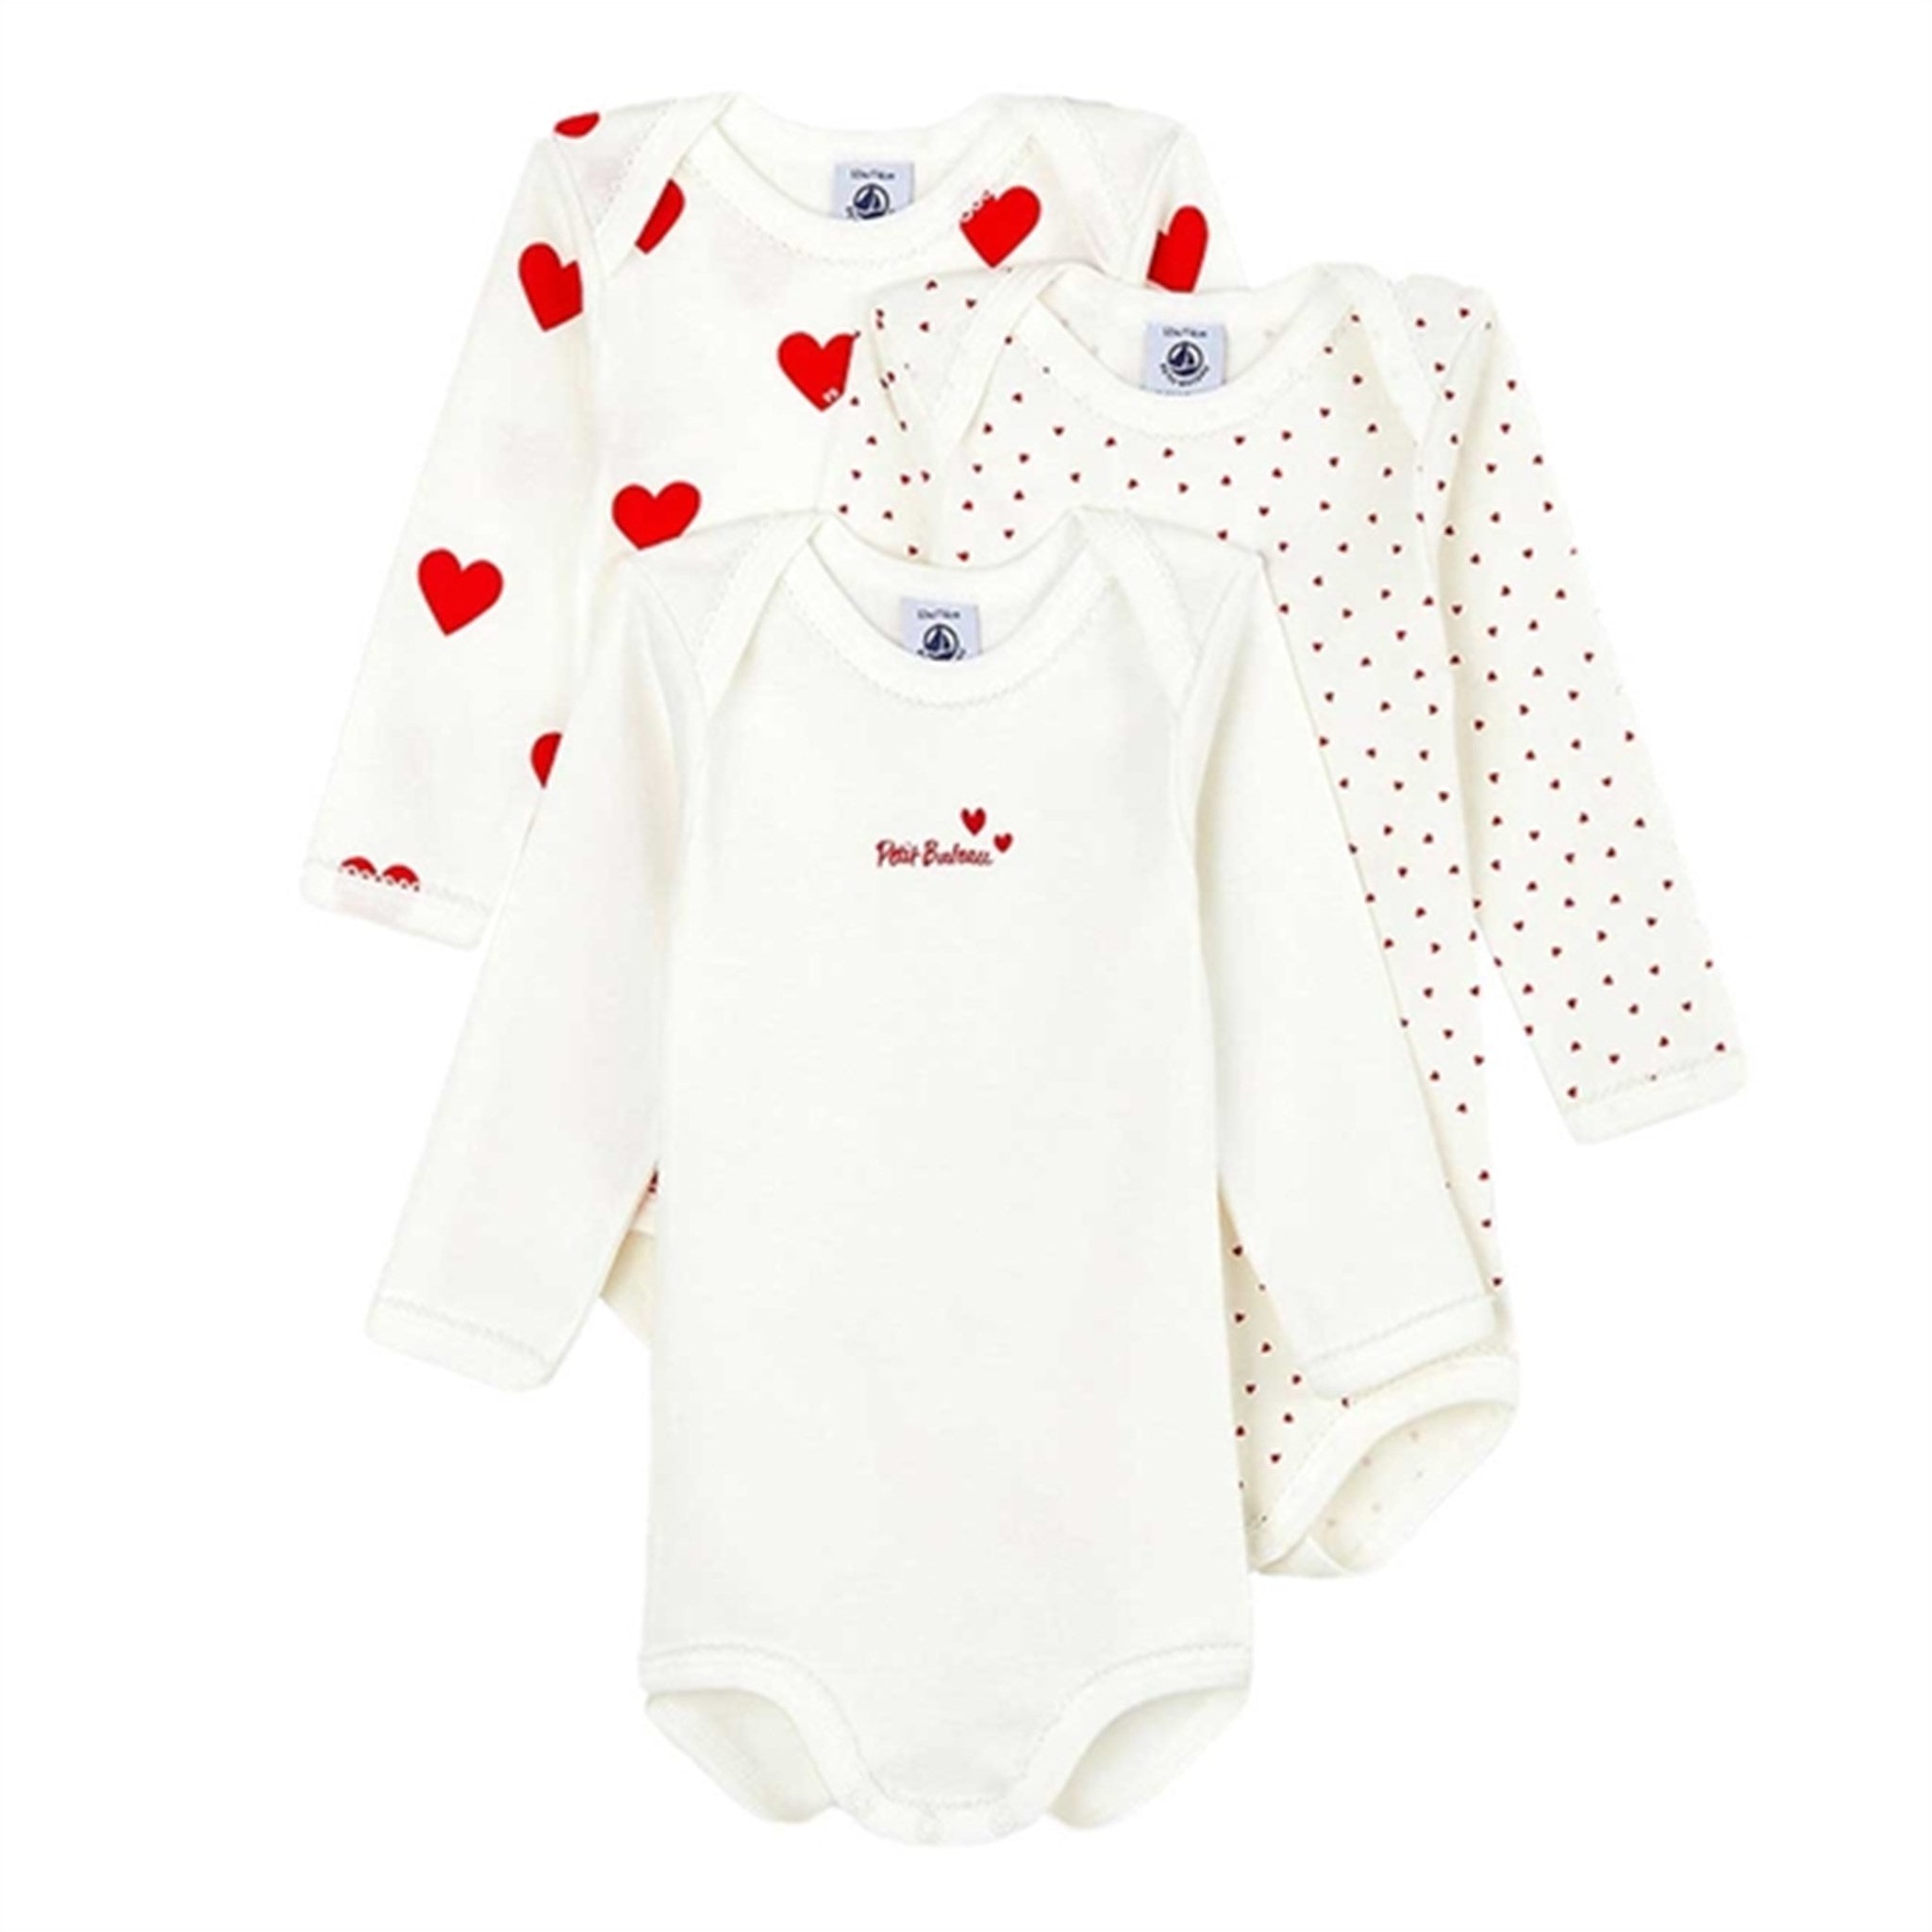 Petit Bateau Bodystocking 3-pack White/Red Hearts